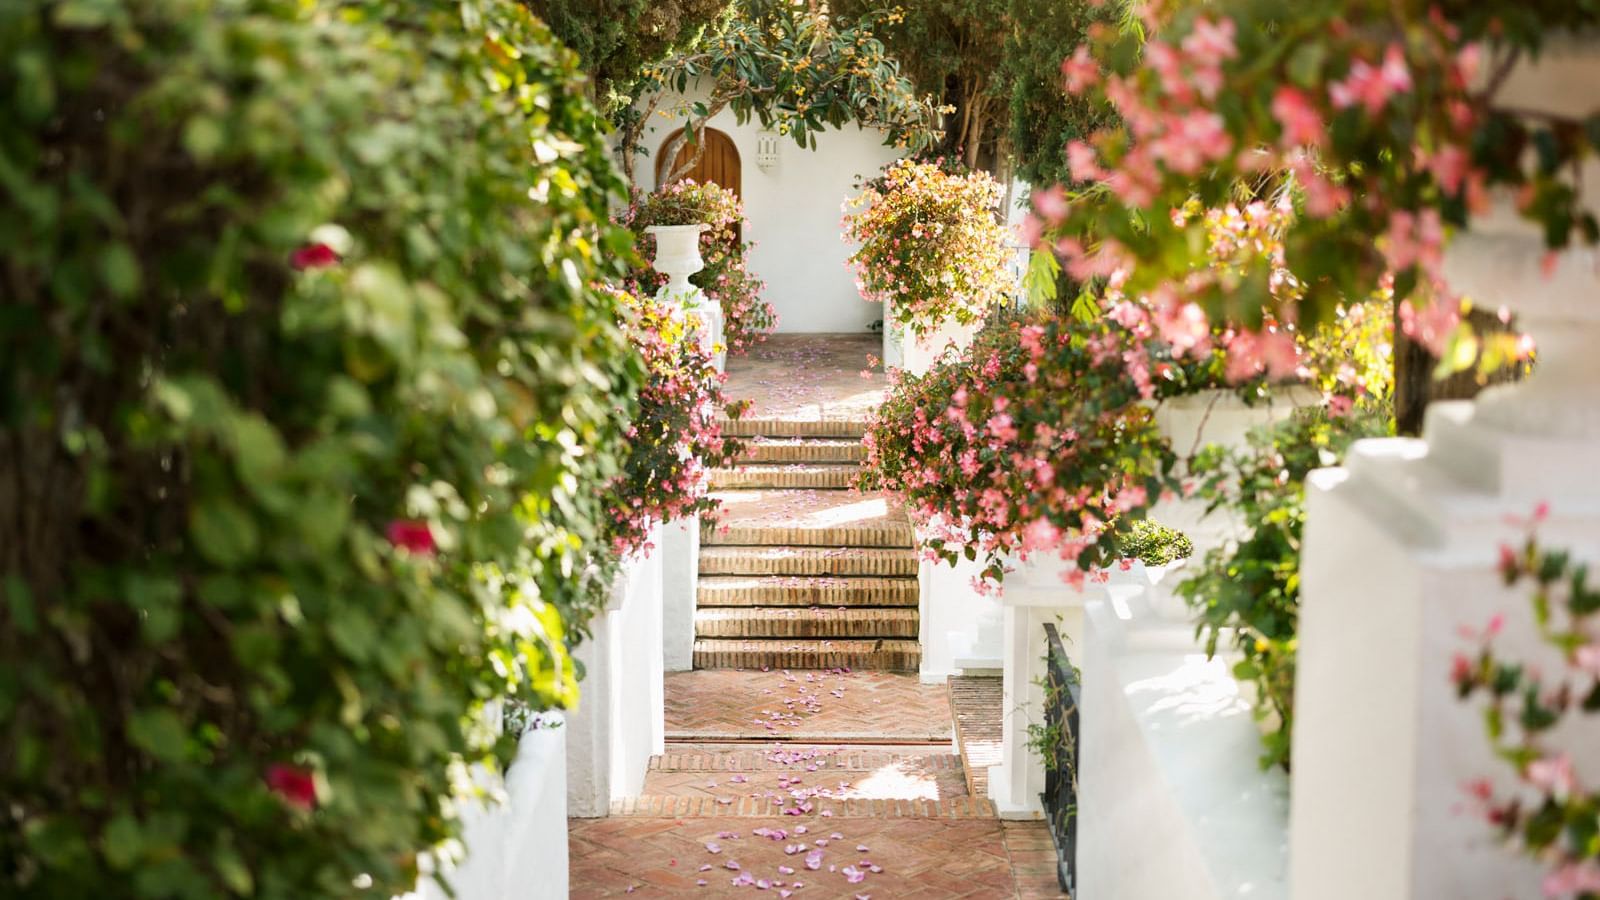 Walkway at the entrance surrounded by flowers at Marbella Club